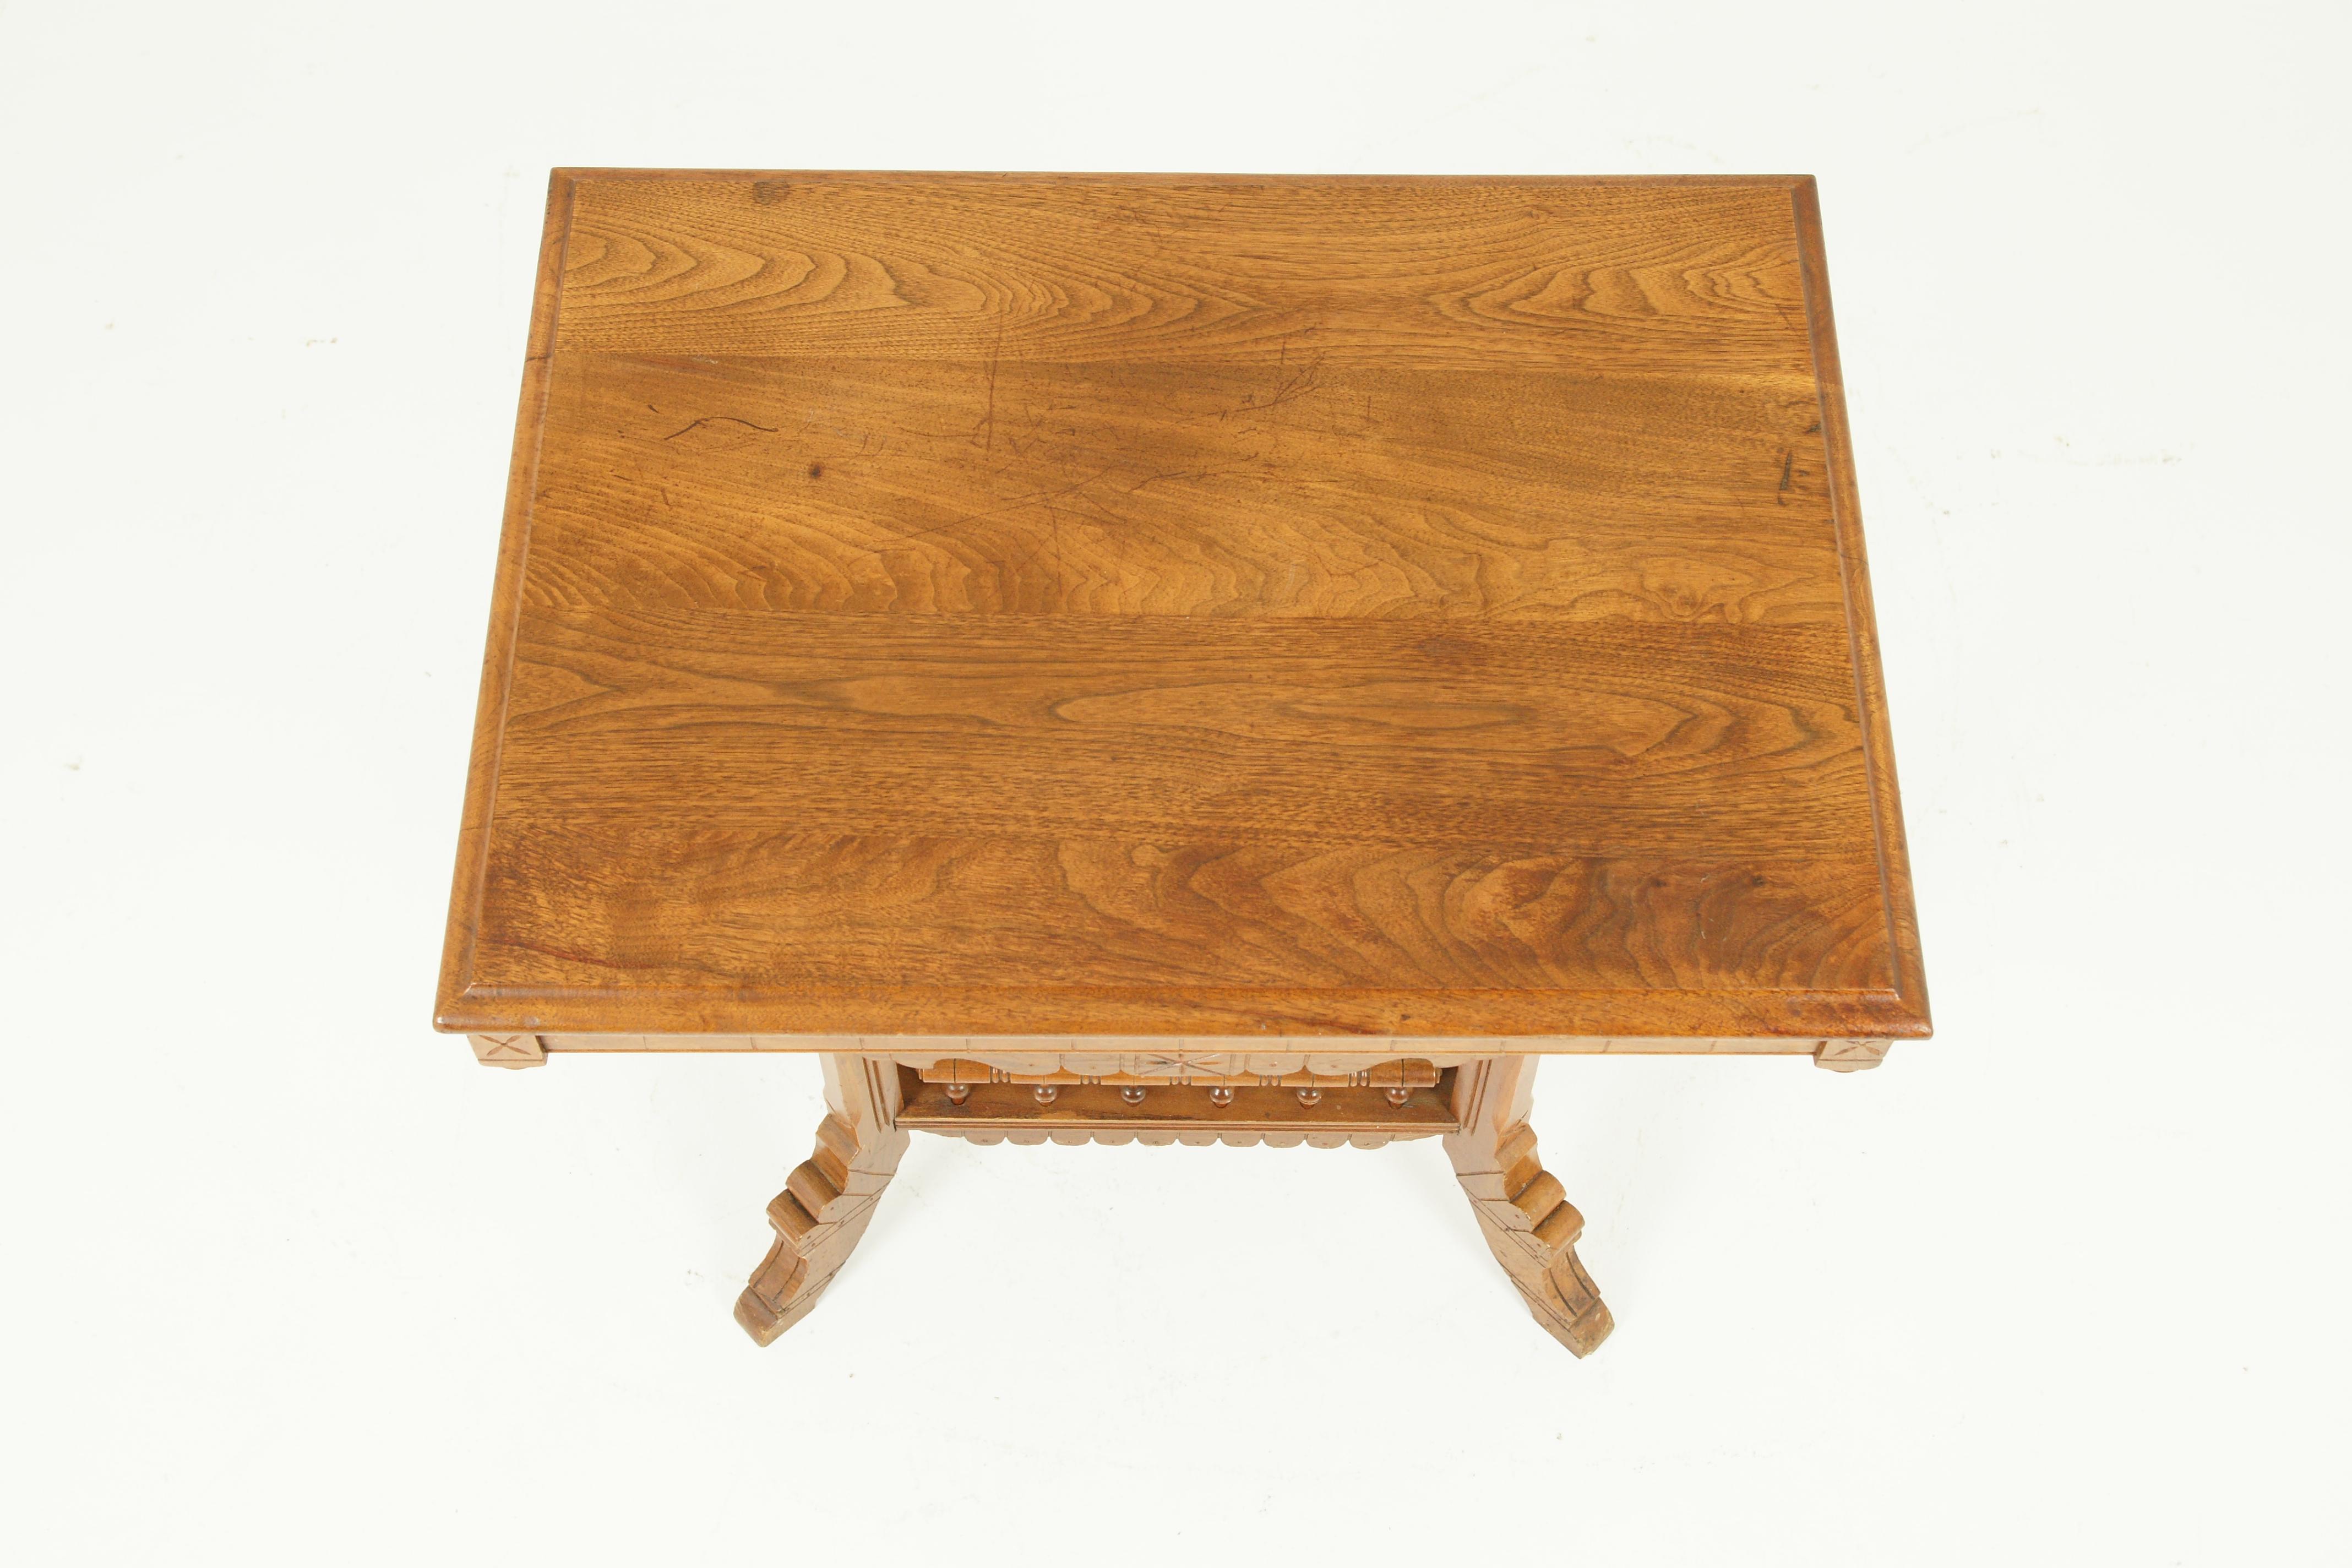 Antique Hall Table, East Lake Hall Table, Stick and Ball, Ash, USA, 1890, B1611

America, 1890
Solid ash
Rectangular top
Moulded edge
Carved underskirt
Finials on all four corners
Stand on four carved outswept legs
Undershelf connected to the